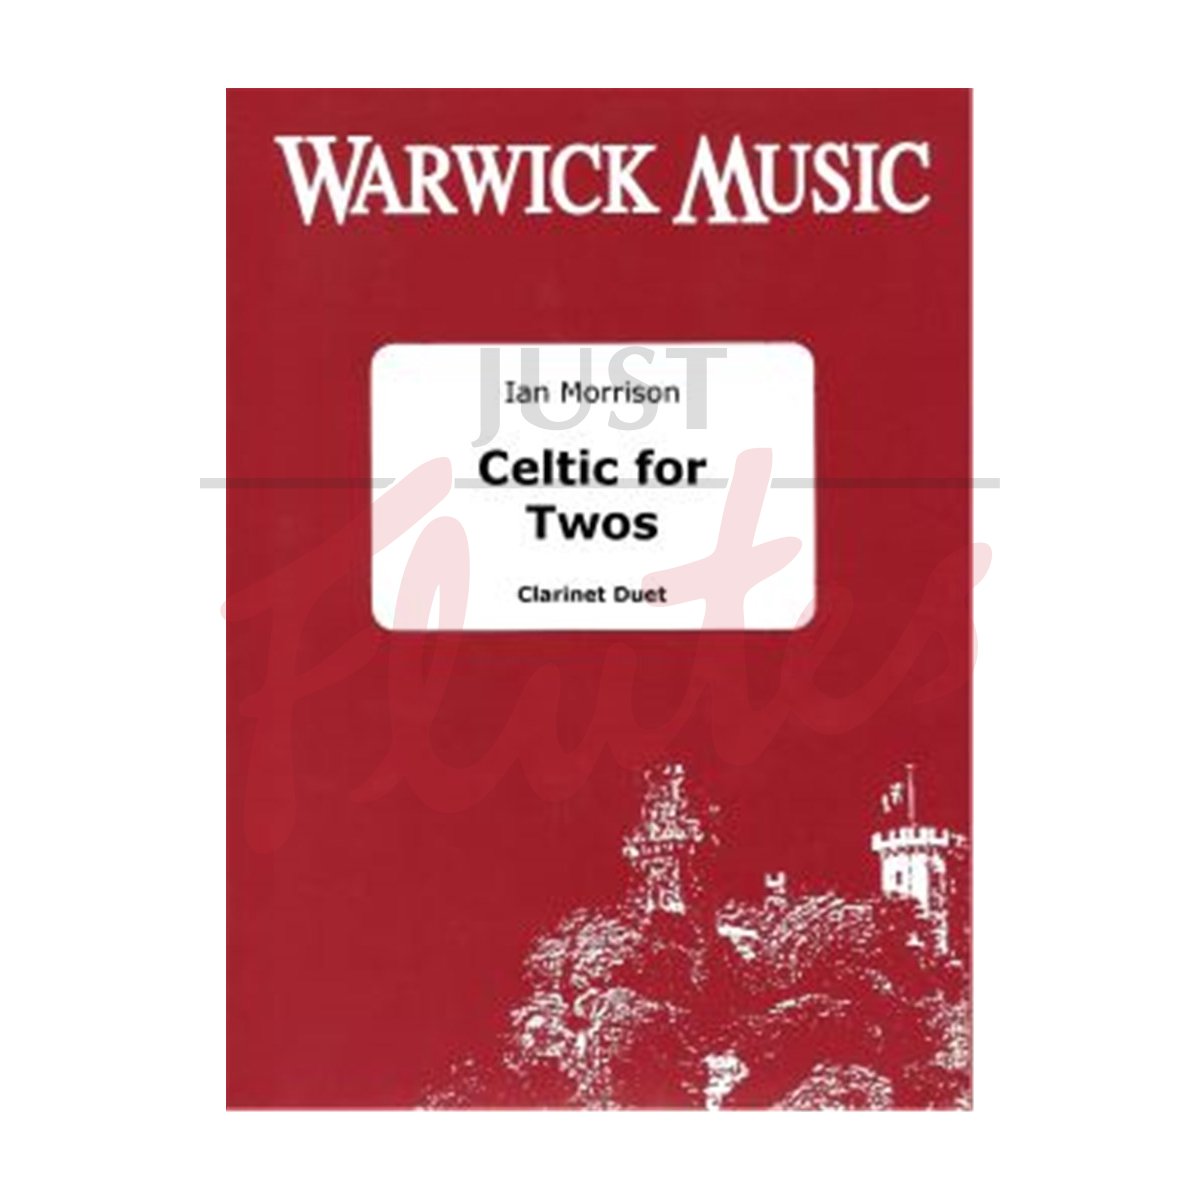 Celtic for Twos for Clarinet Duet